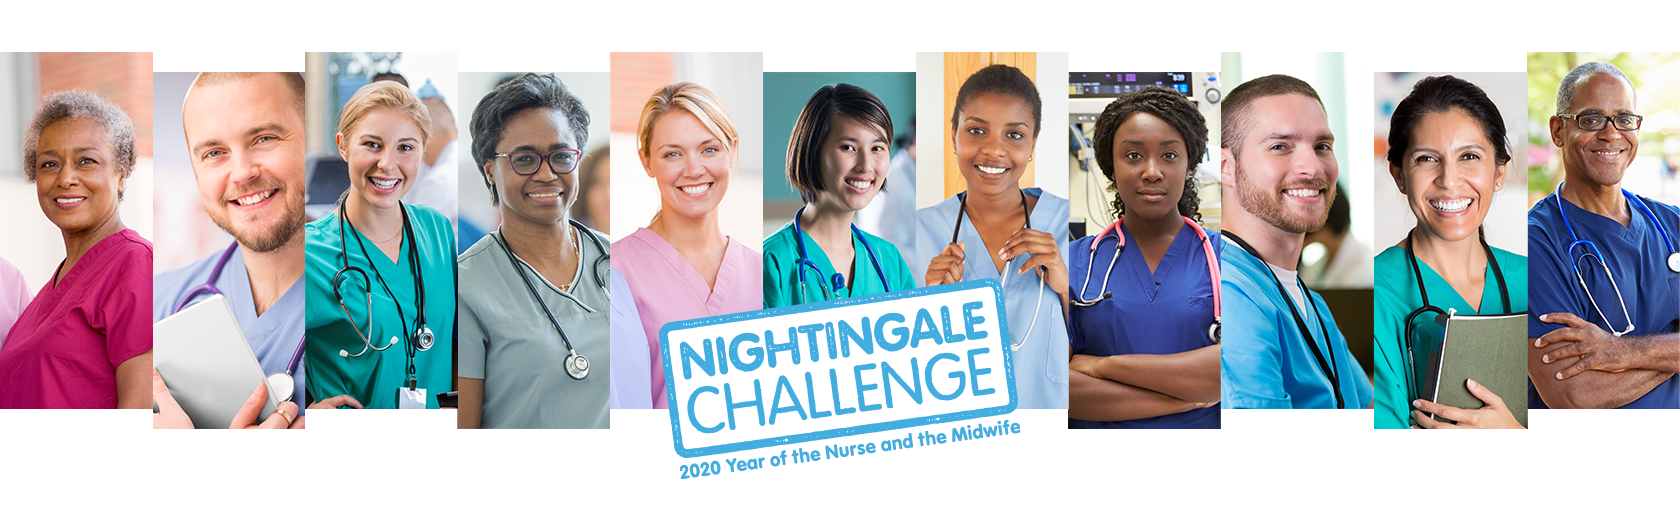 Nightingale Challenge - 2020 Year of the Nurse and the Midwife